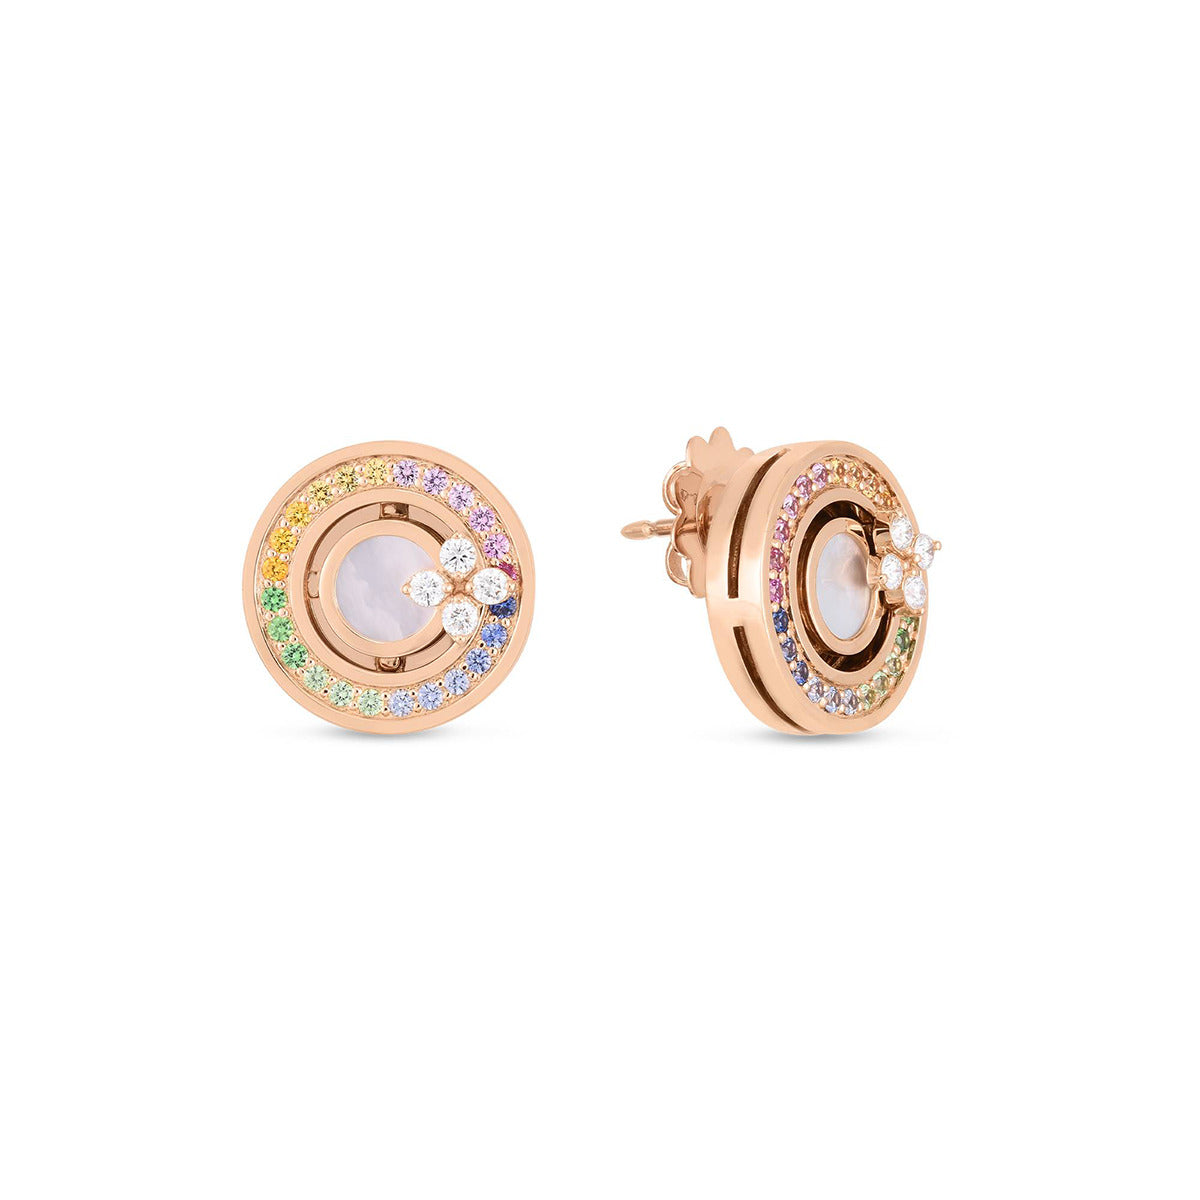 Buy Premium Rainbow Moonstone Stud Earrings in Platinum Over Sterling  Silver 1.90 ctw at ShopLC.